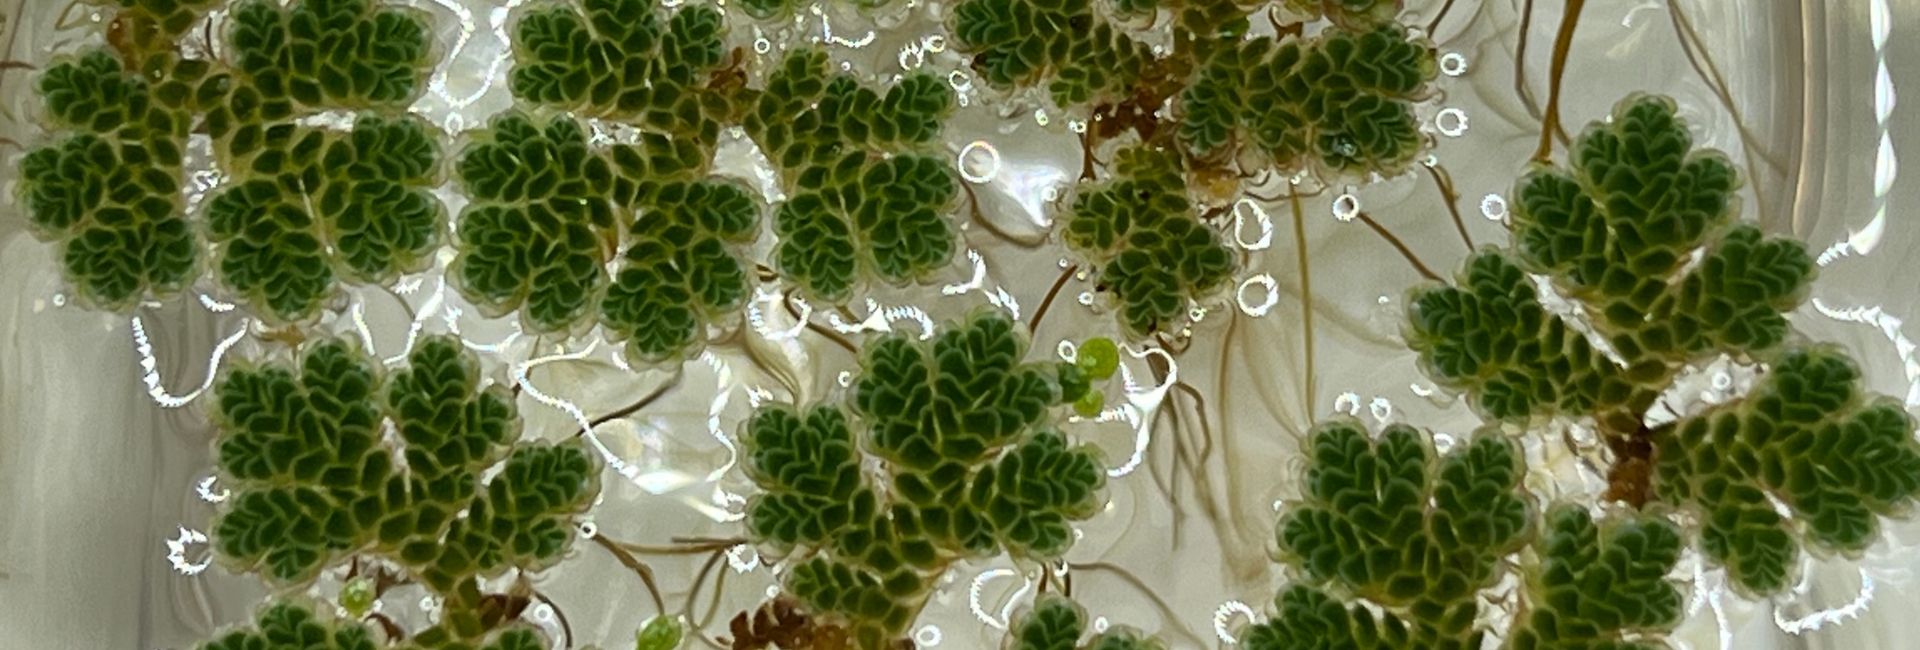 Azolla plants floating on water